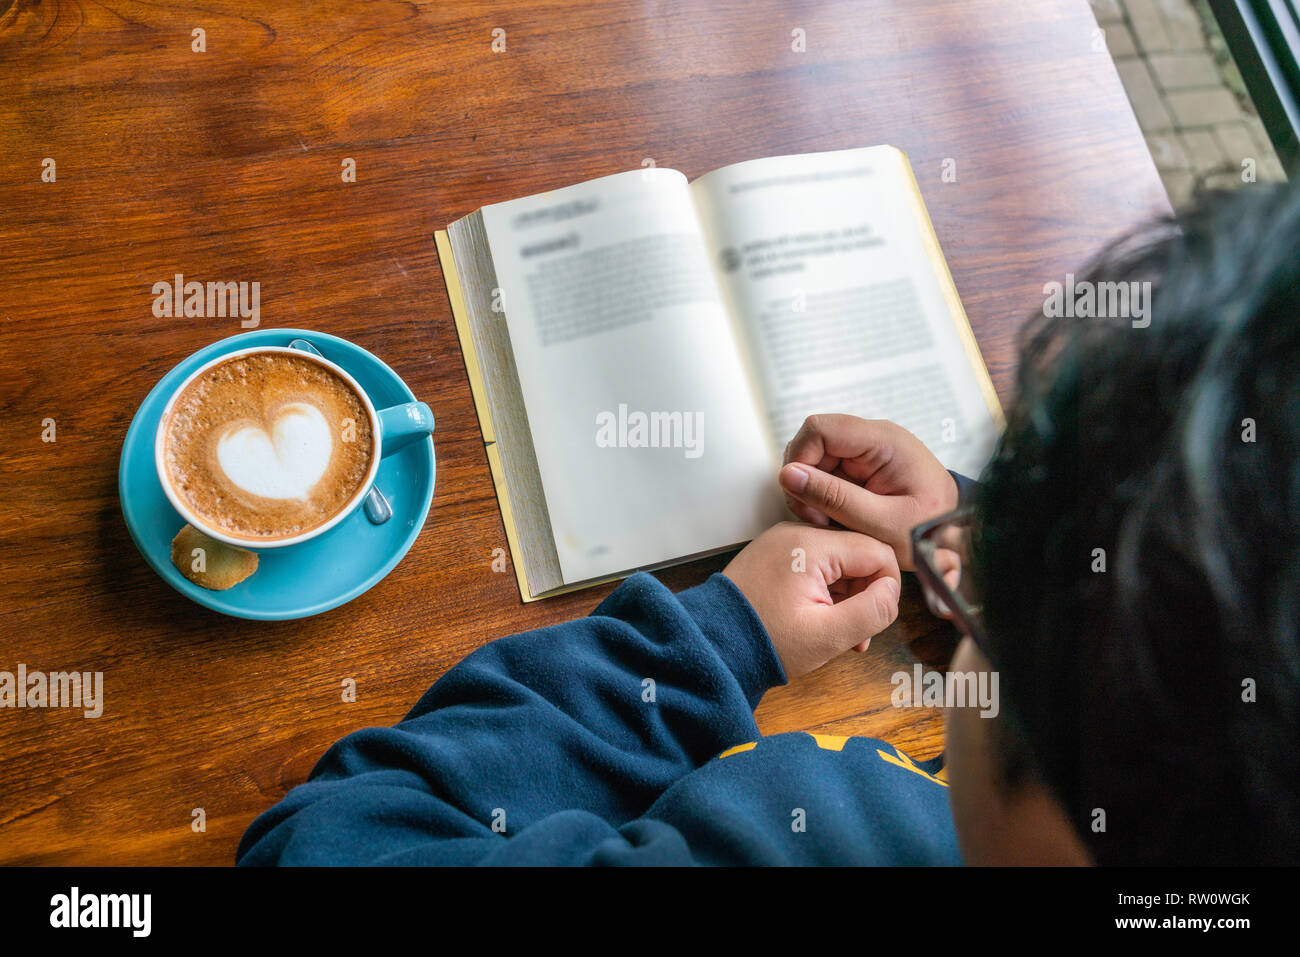 Top view of young girl reading book and drinking coffee Stock Photo